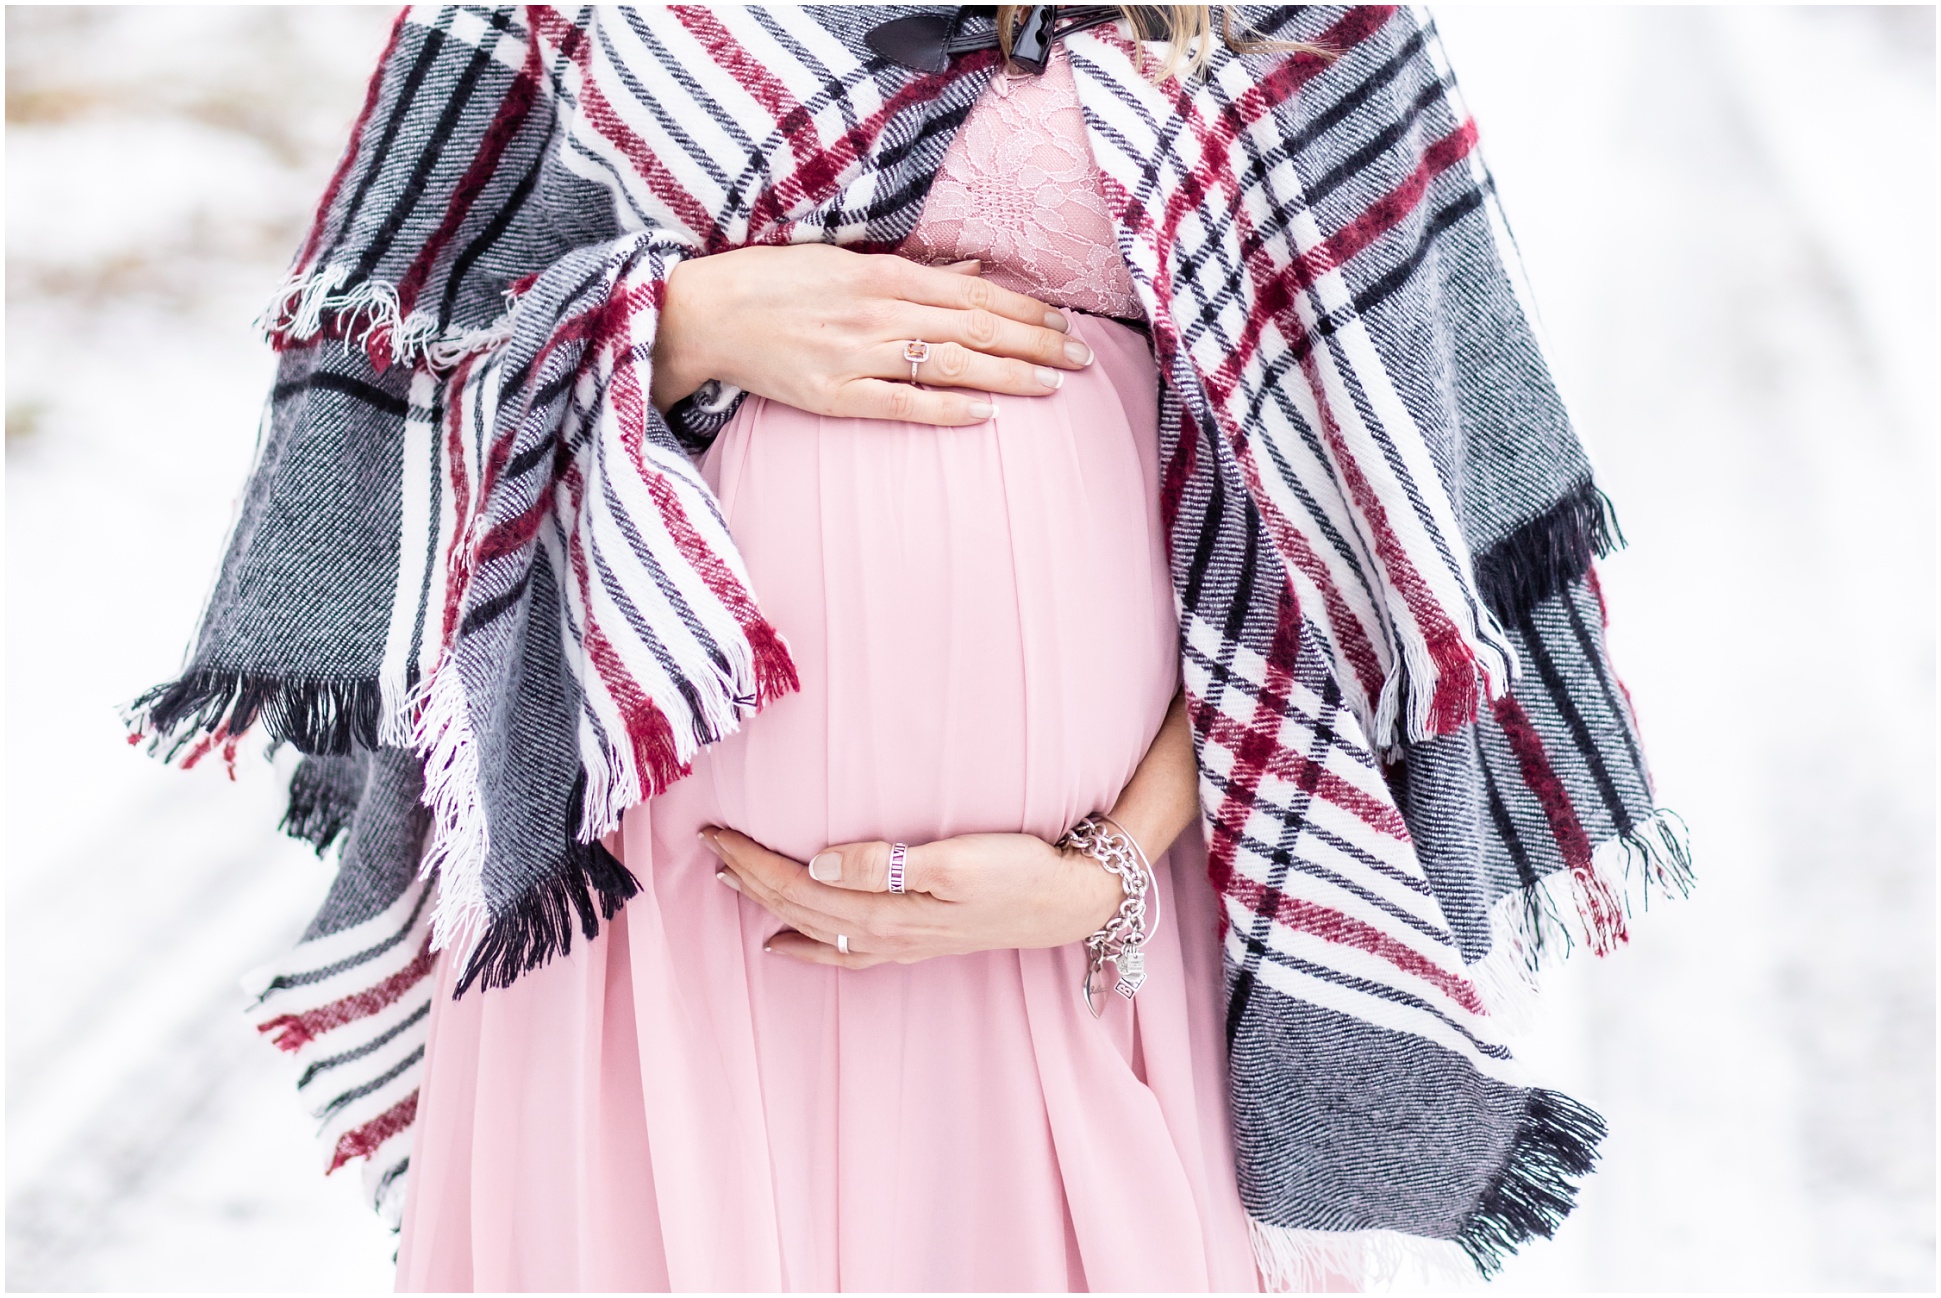 Close up shot of a baby bump with a pink flow dress and a winter shawl